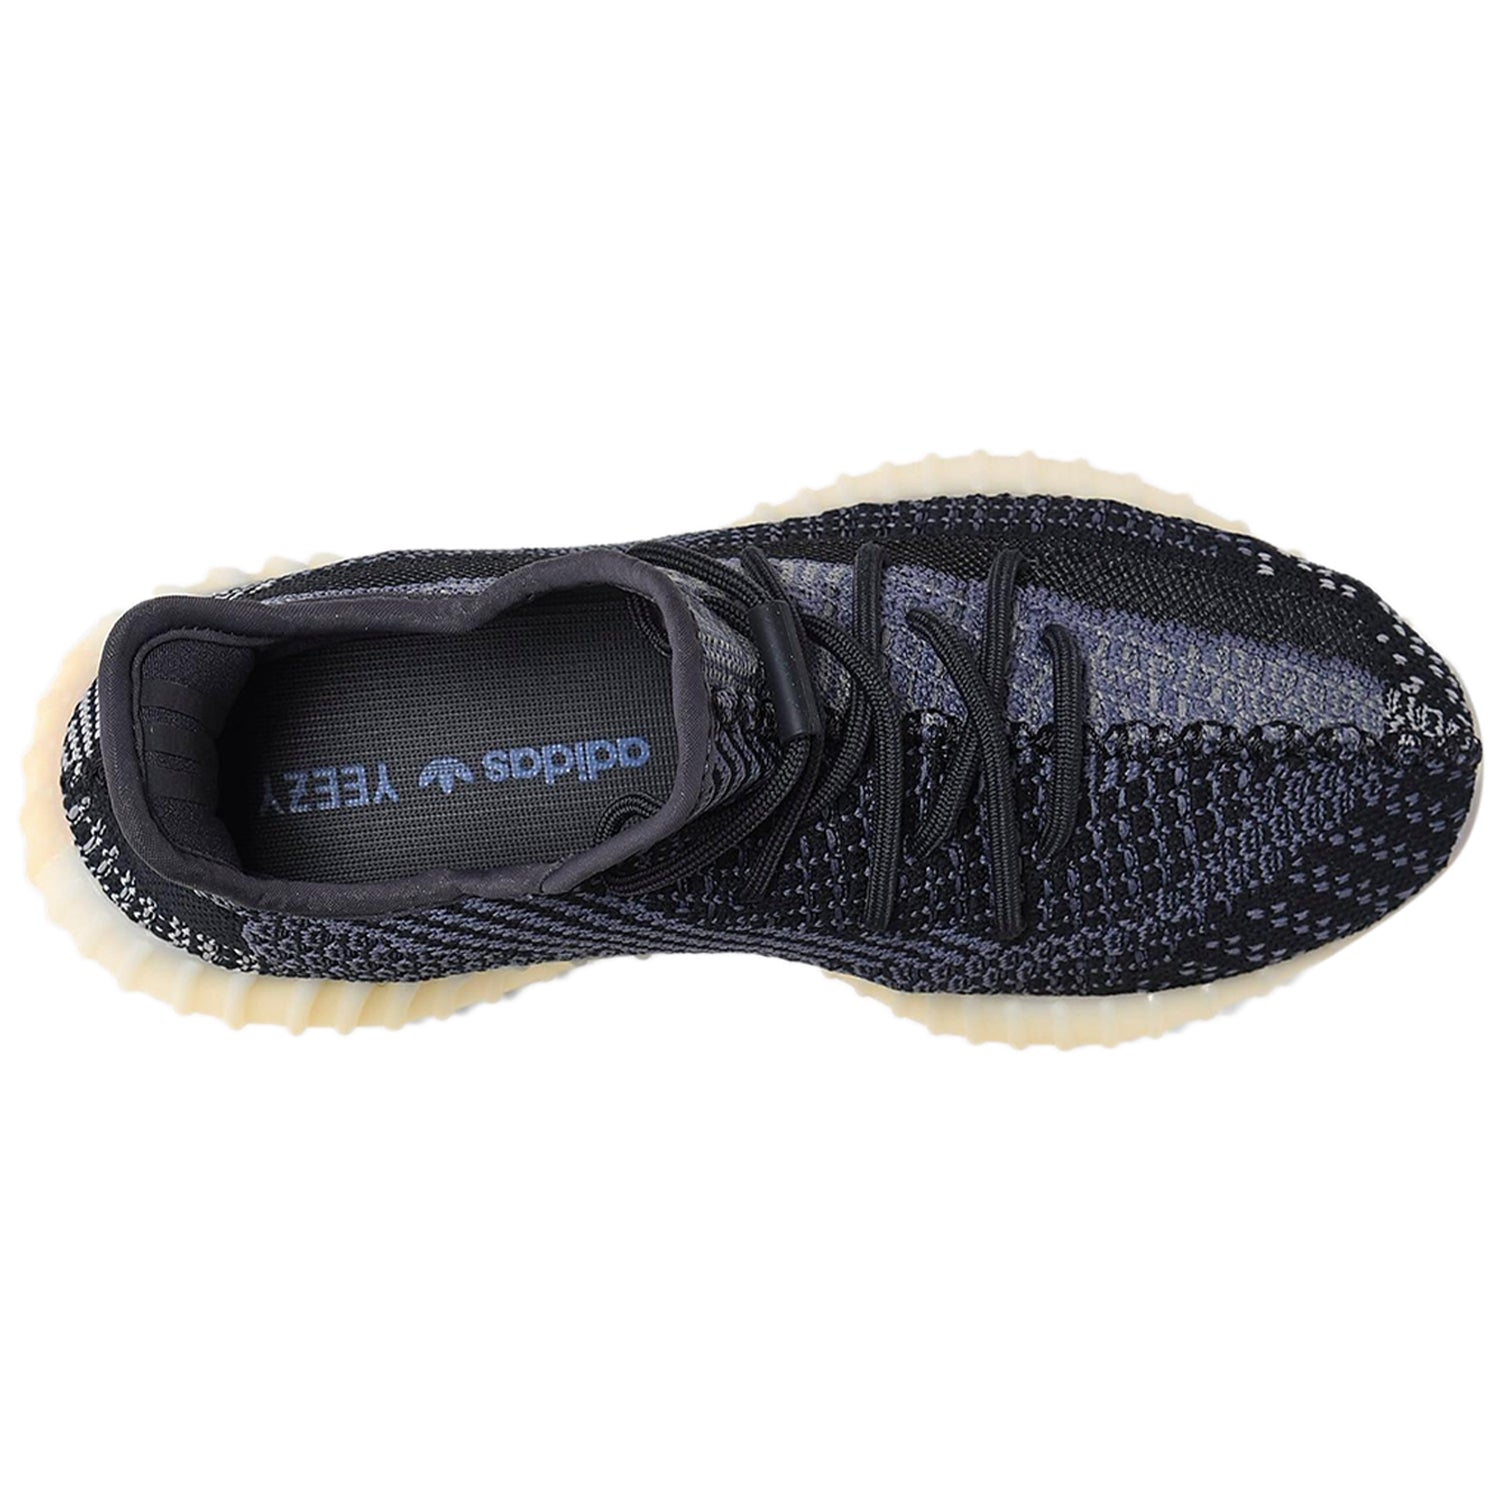 adidas Yeezy Boost 350 V2 Carbon (Infants)